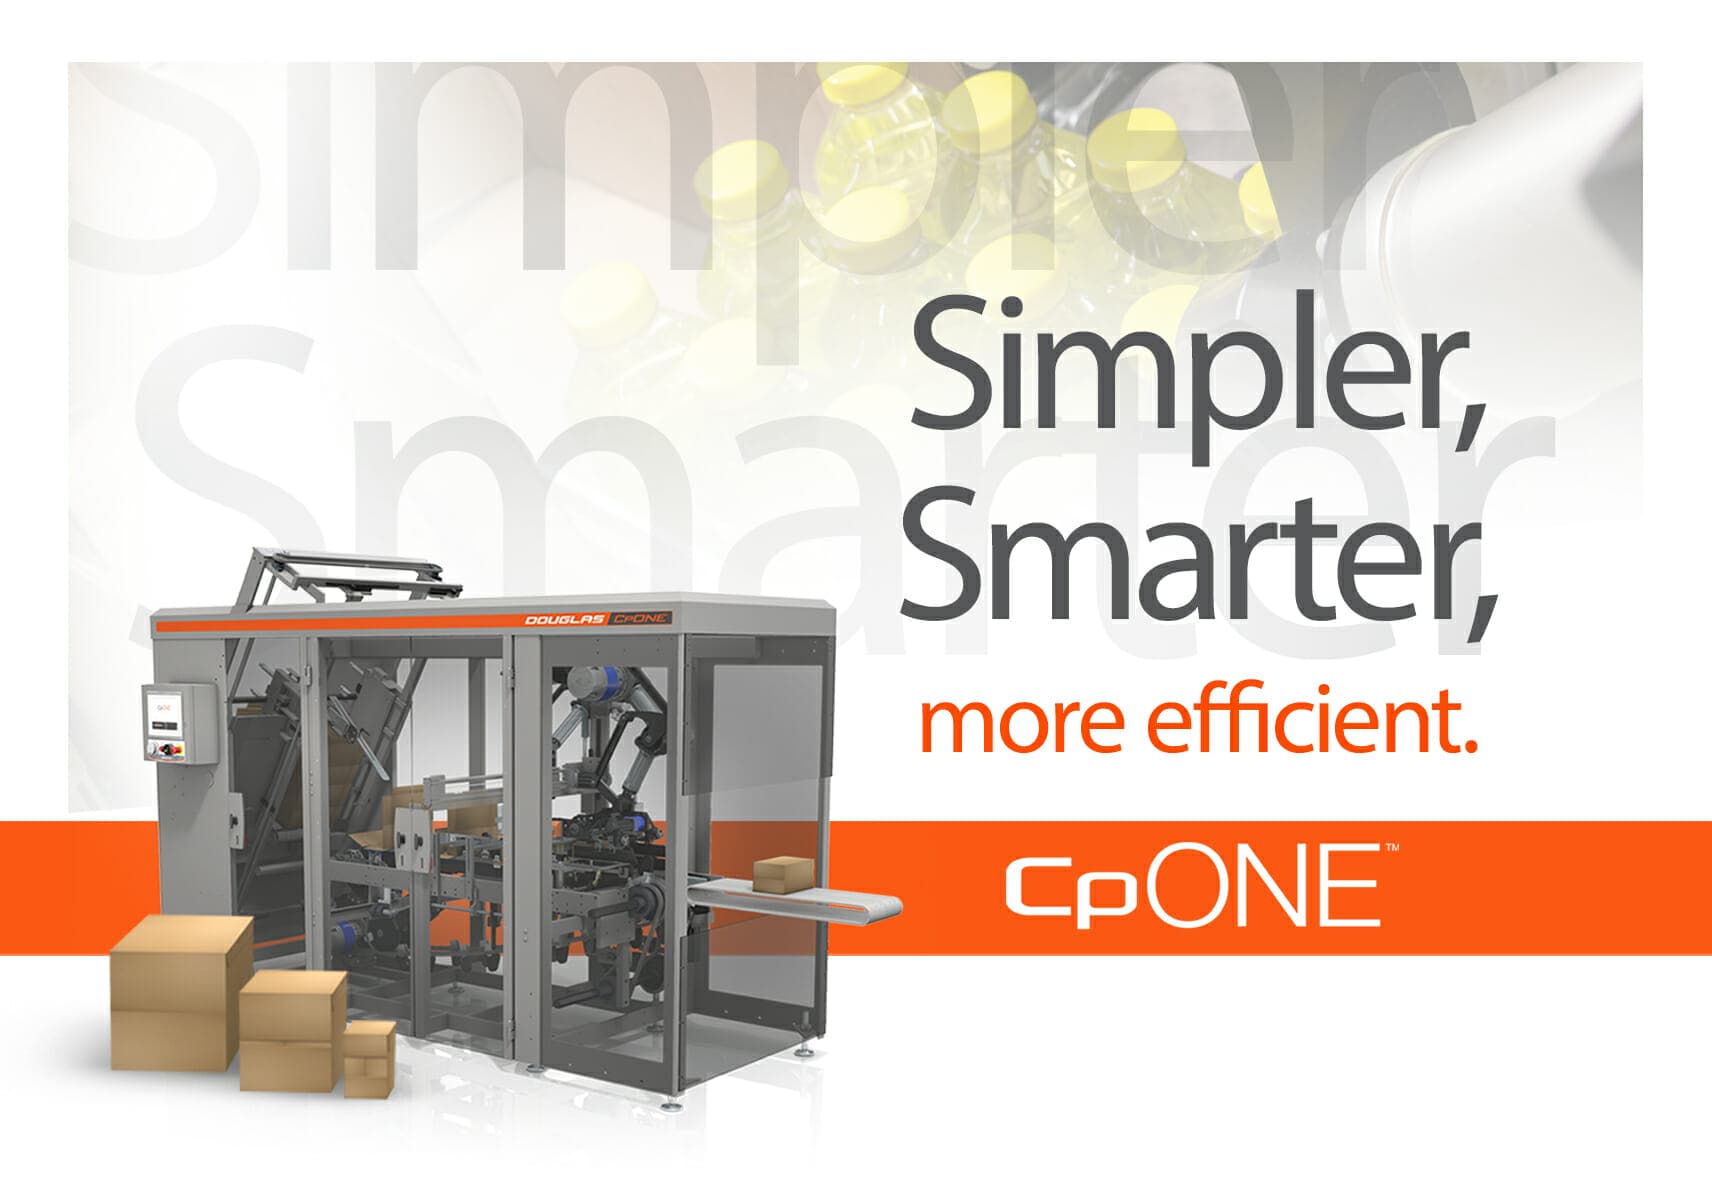 CpONE case & tray packer simplifies case packing operations